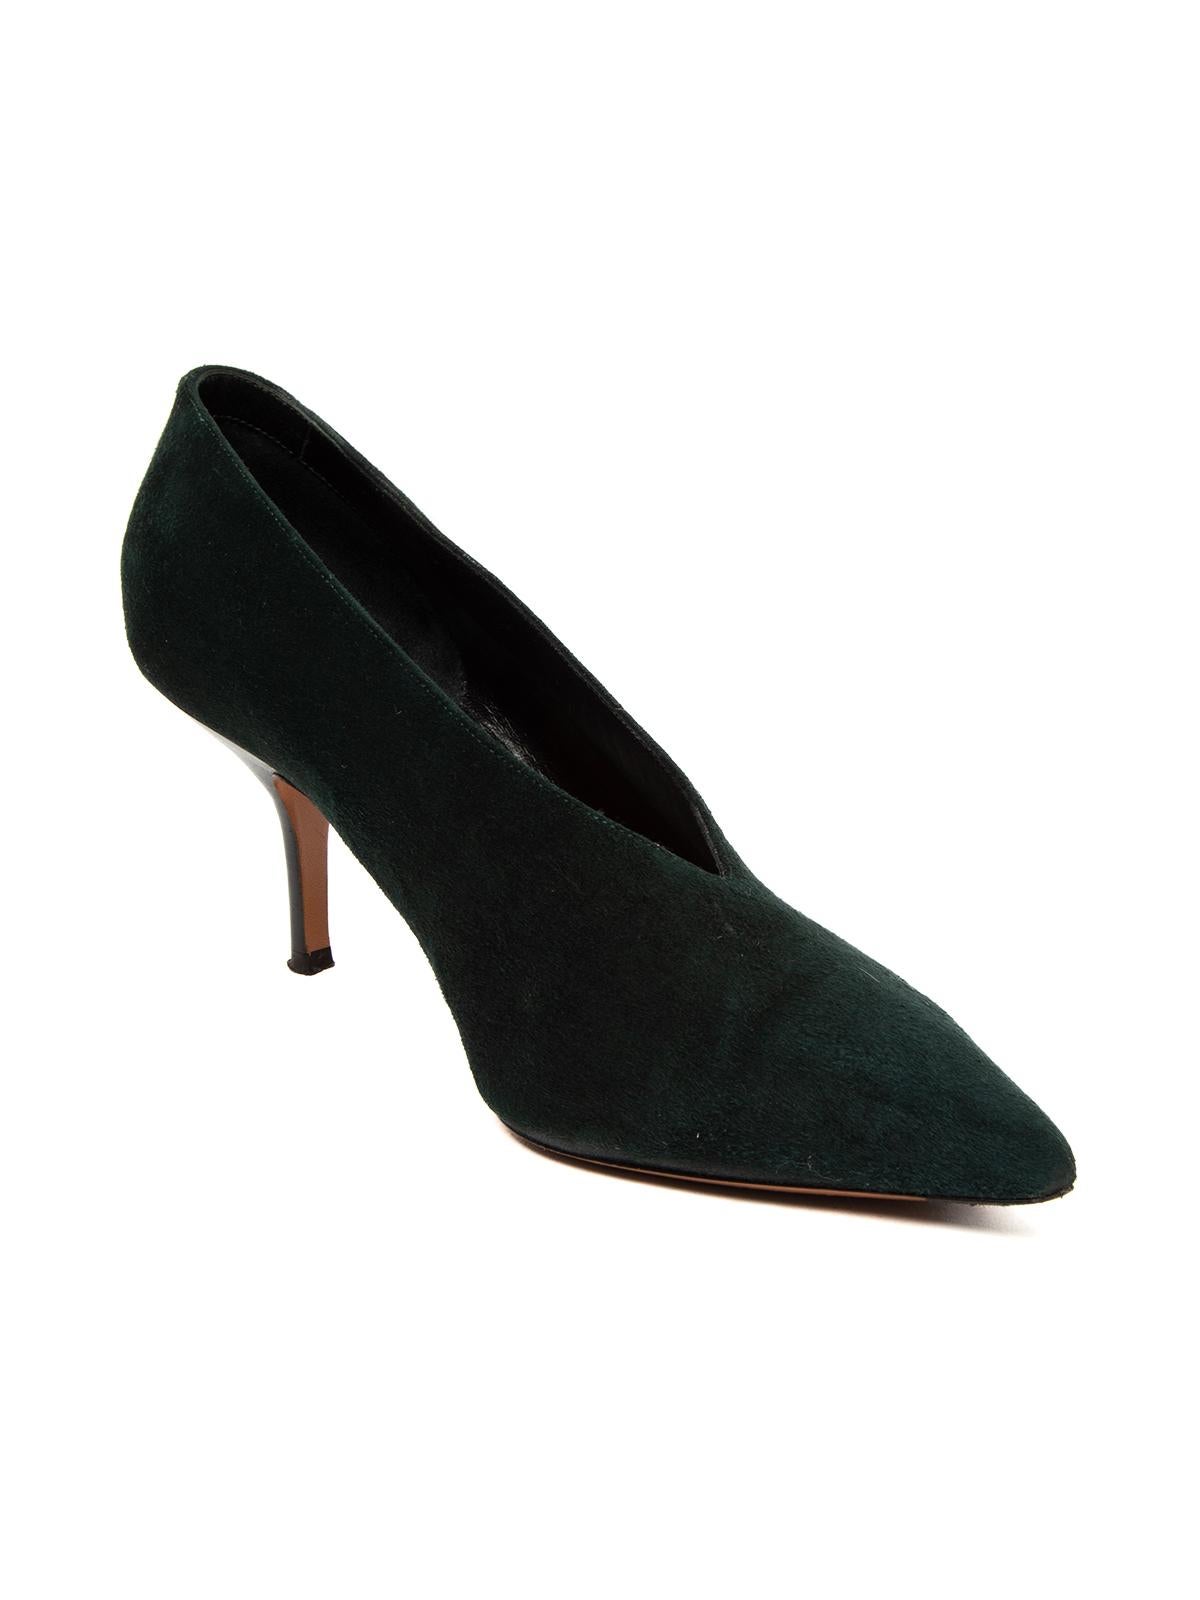 CONDITION is Good. General wear to heels is evident. General wear to heel tips, outersole and suede material on this used Celine designer resale item. Details V neck heels Colour - green Material - suede Style - kitten Toe style - point-toe leather